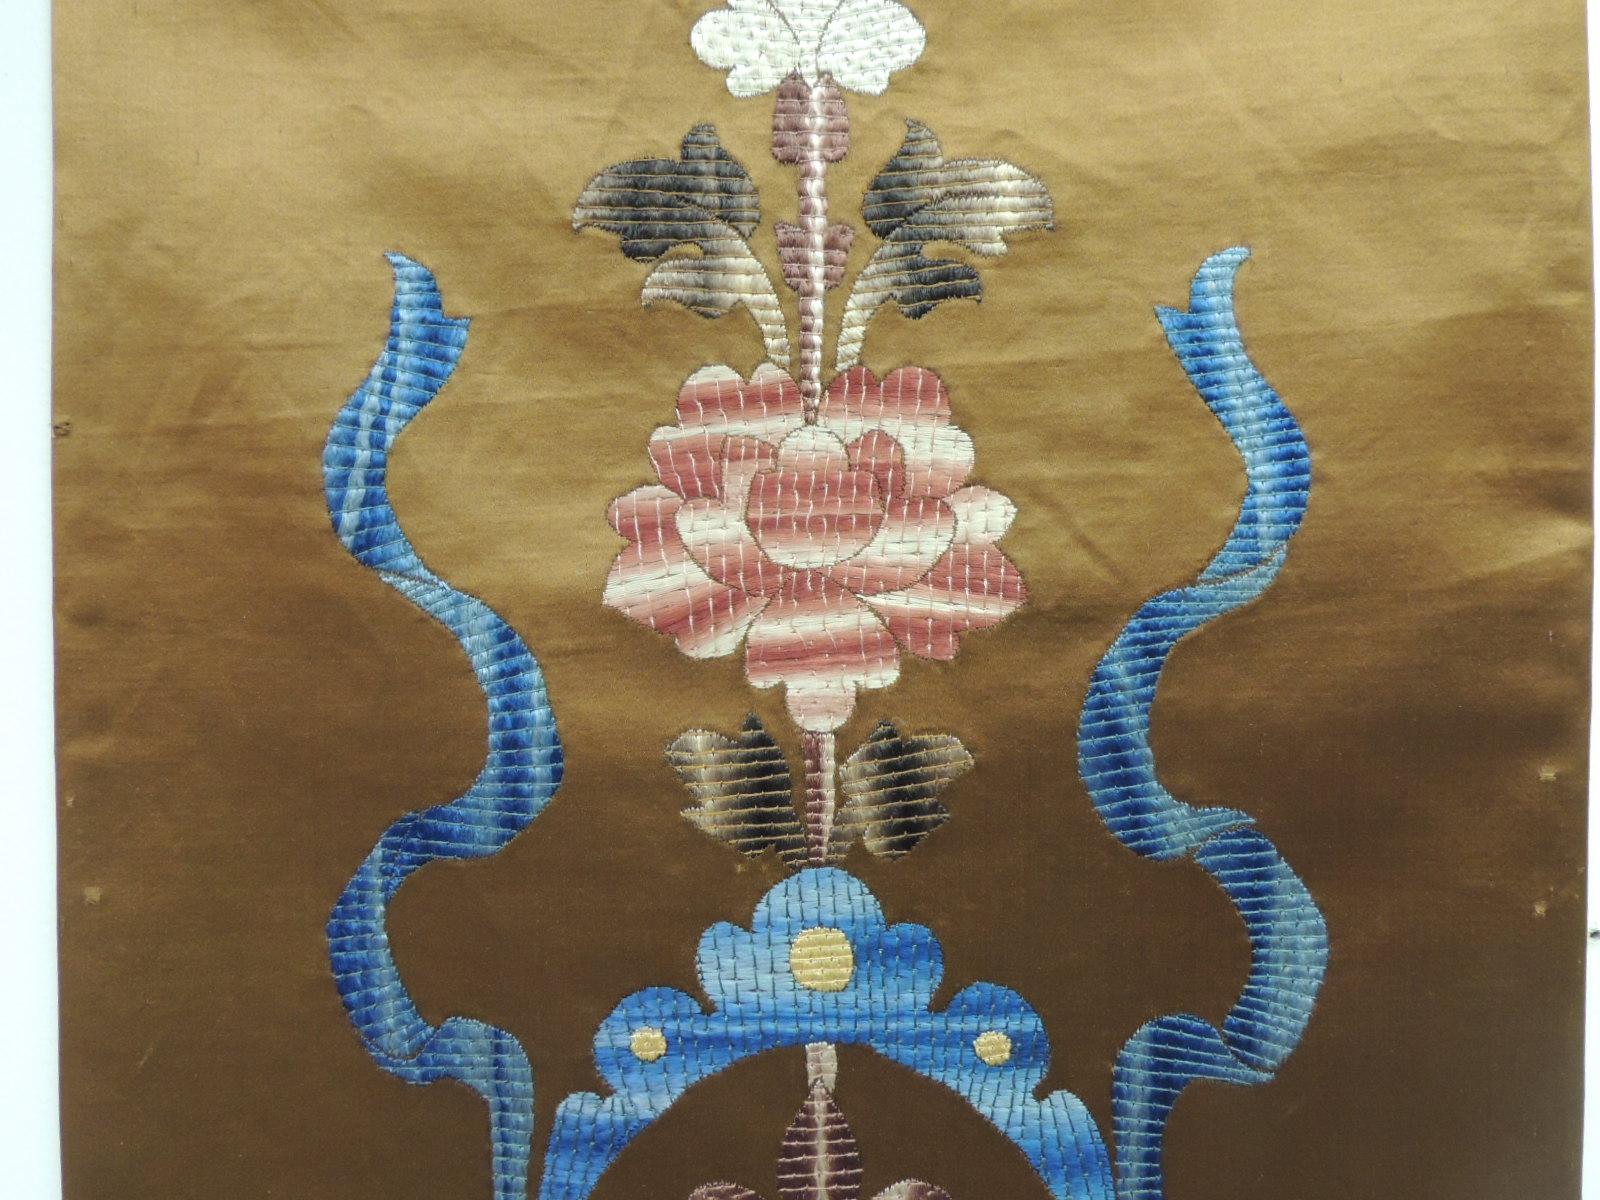 Antique Italian Gold and Blue Silk Floss Threads Embroidered Panel.
Depicting flowers and garlands. Silk on silk embroidery.
In shades of gold, blue, red, burgundy and brown with solid natural cotton backing.
Ideal as a wall hanging ot=r a long